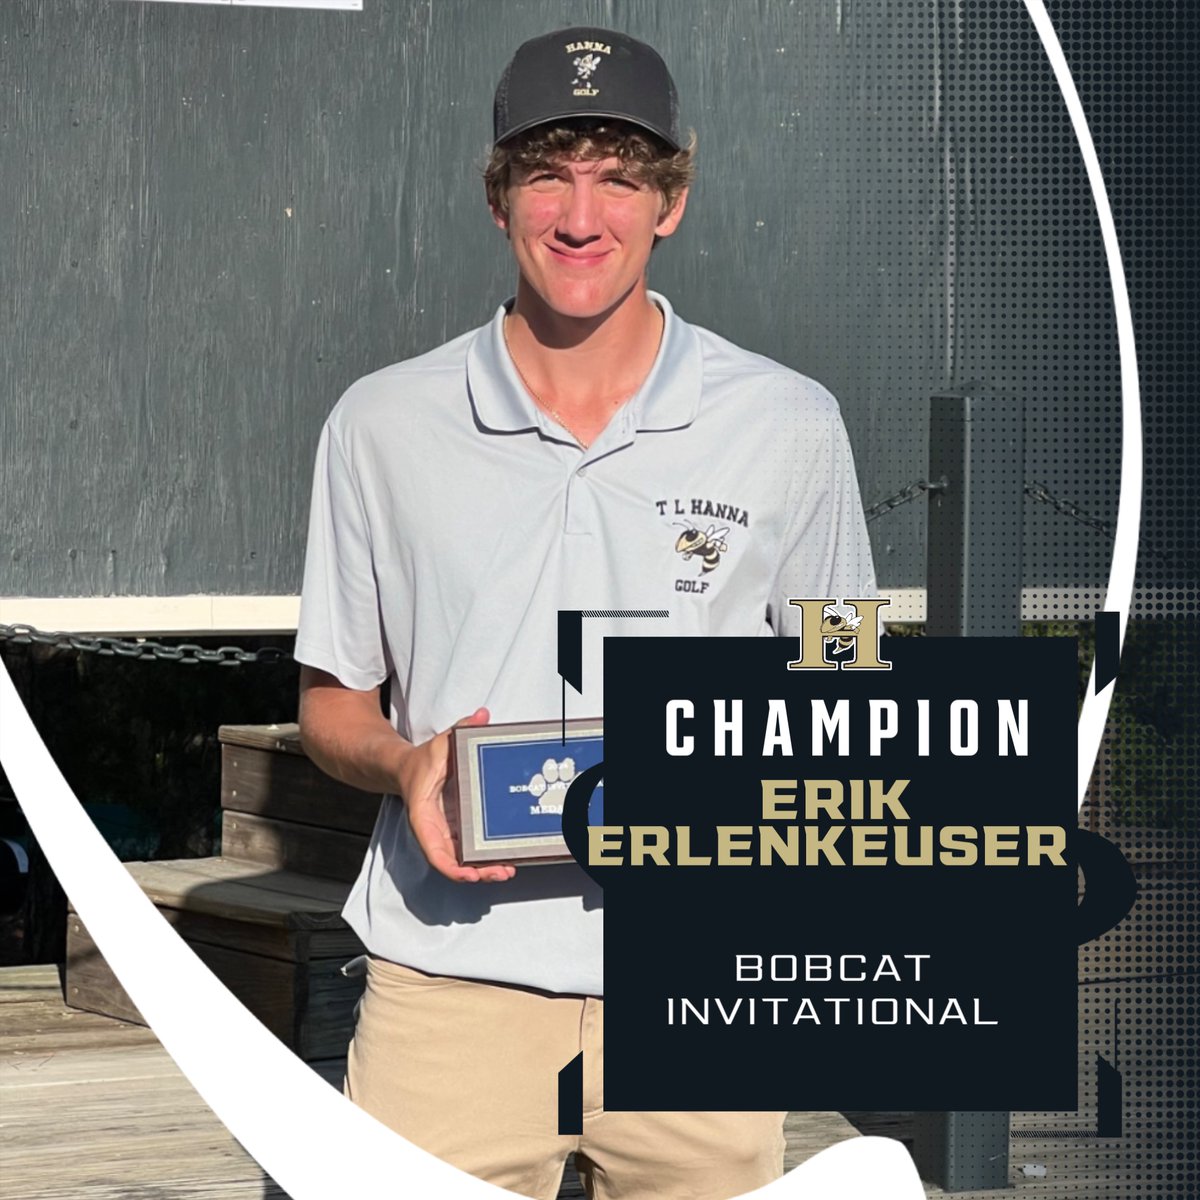 Congrats to TL Hanna sophomore Erik Erlenkeuser, who fired a 4 under par round of 68 today to take the medalist honors at the Bobcat Invitational at Crosscreek CC. Erik's performance helped lead Hanna to the tournament title with a 293 team score. @tlhanna_ad